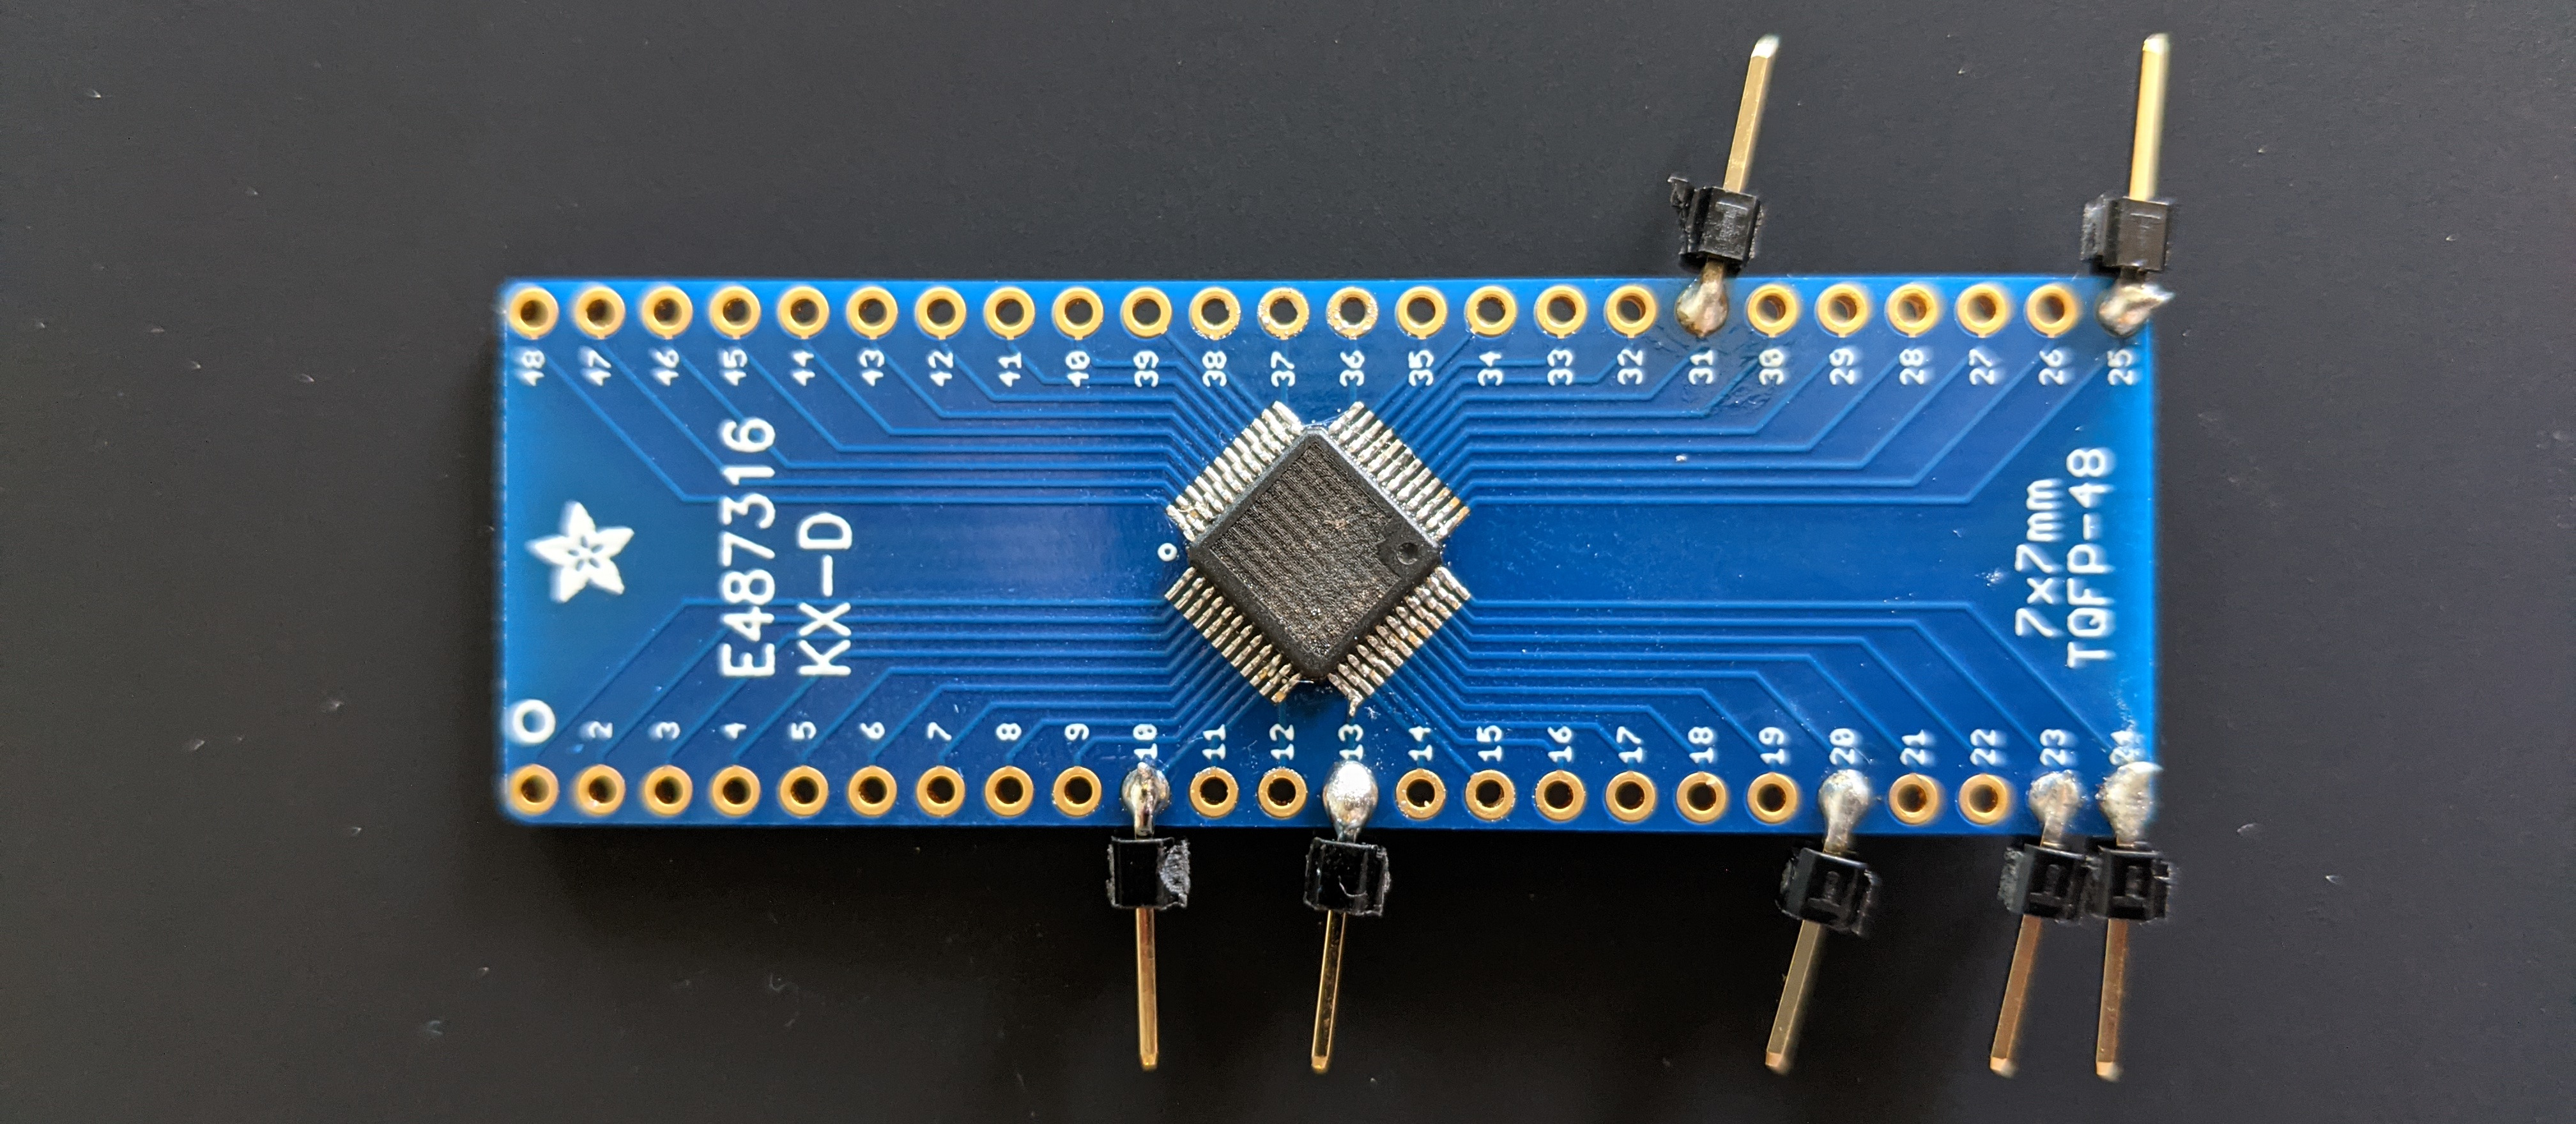 Photo of a QFN48 breakout board with the Rollova’s original STM32 chip soldered on